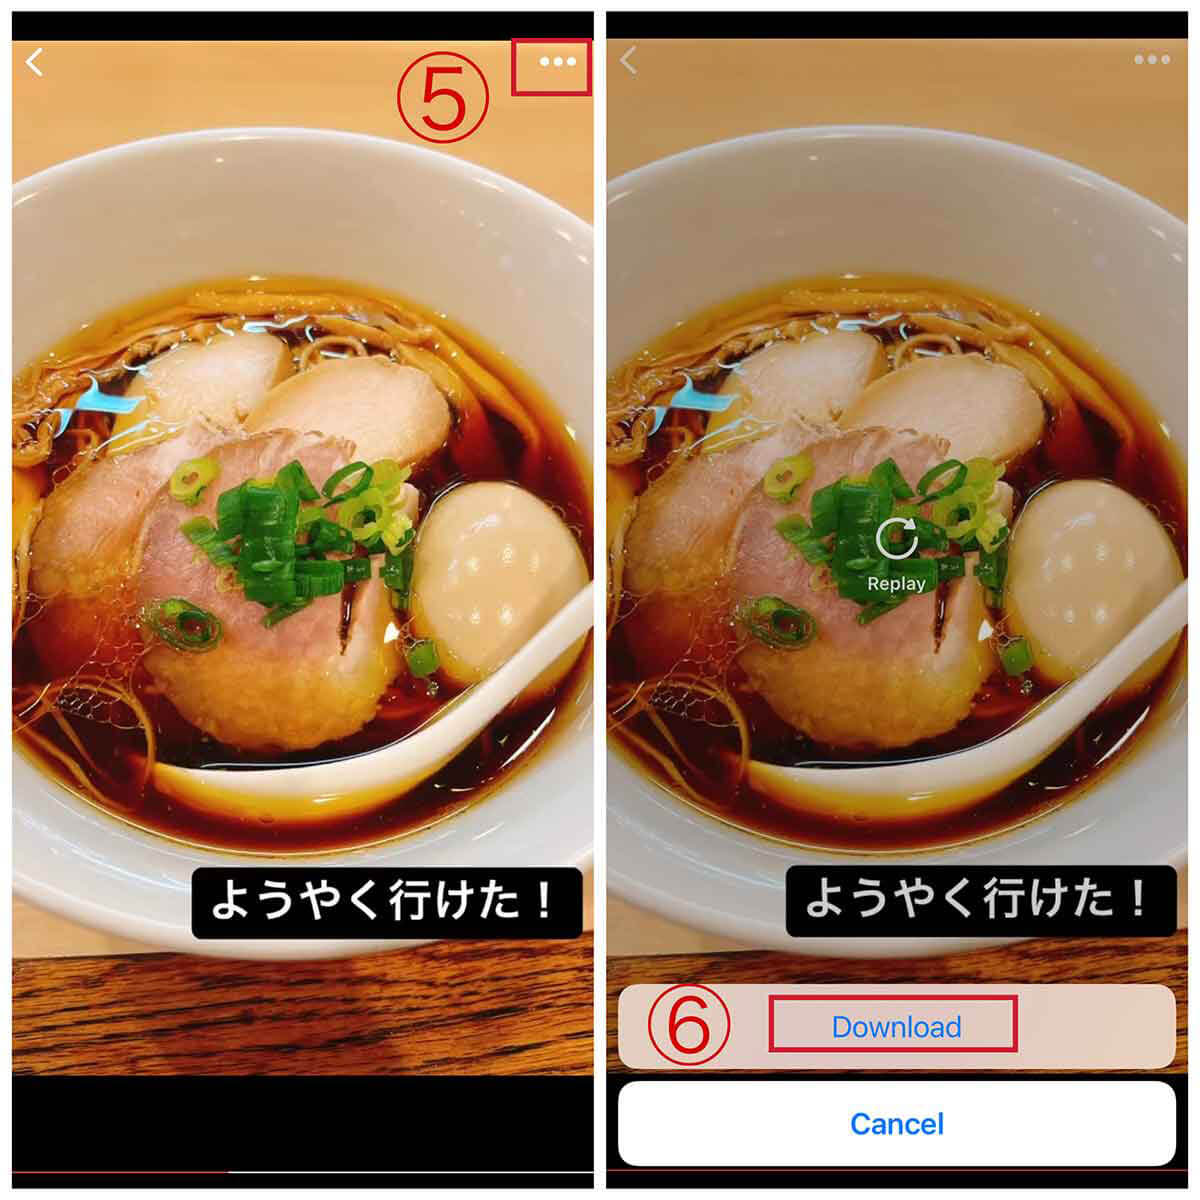 iStory for Instagram | ストーリーズのみ閲覧/保存が可能3